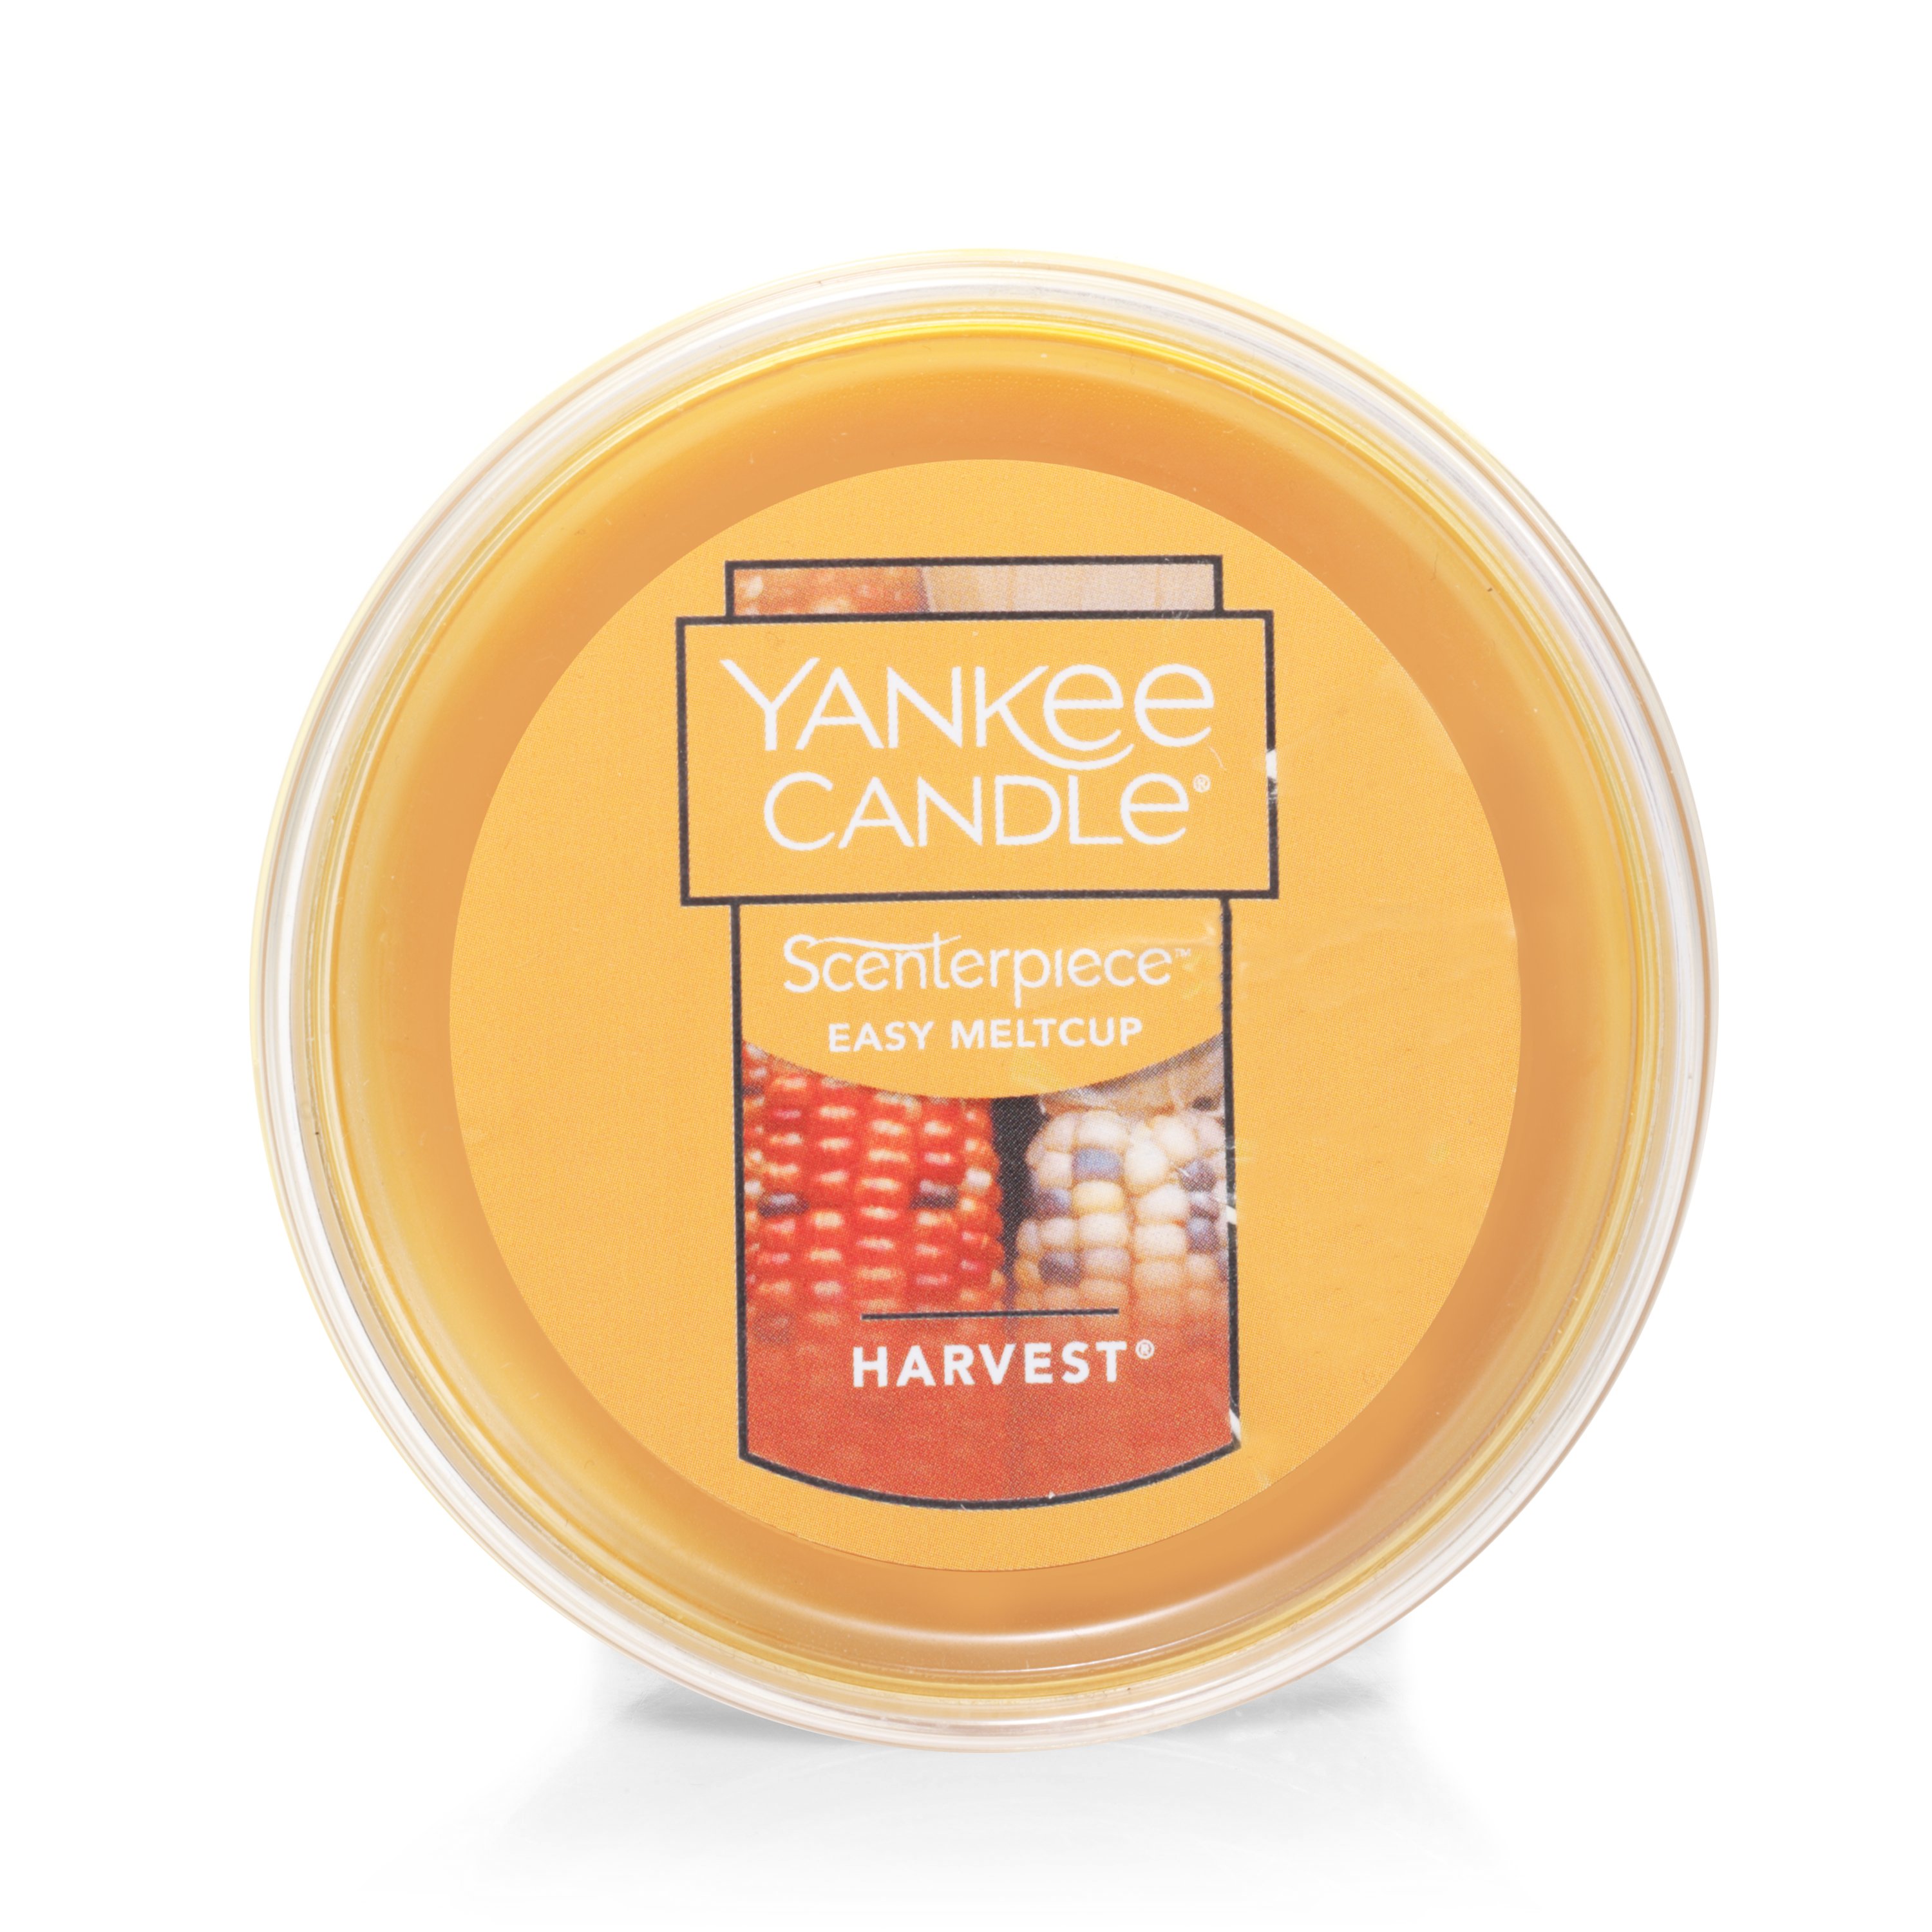 Yankee Candle Scenterpiece Easy Meltcups ***NEW SCENTS*** To Choose From 